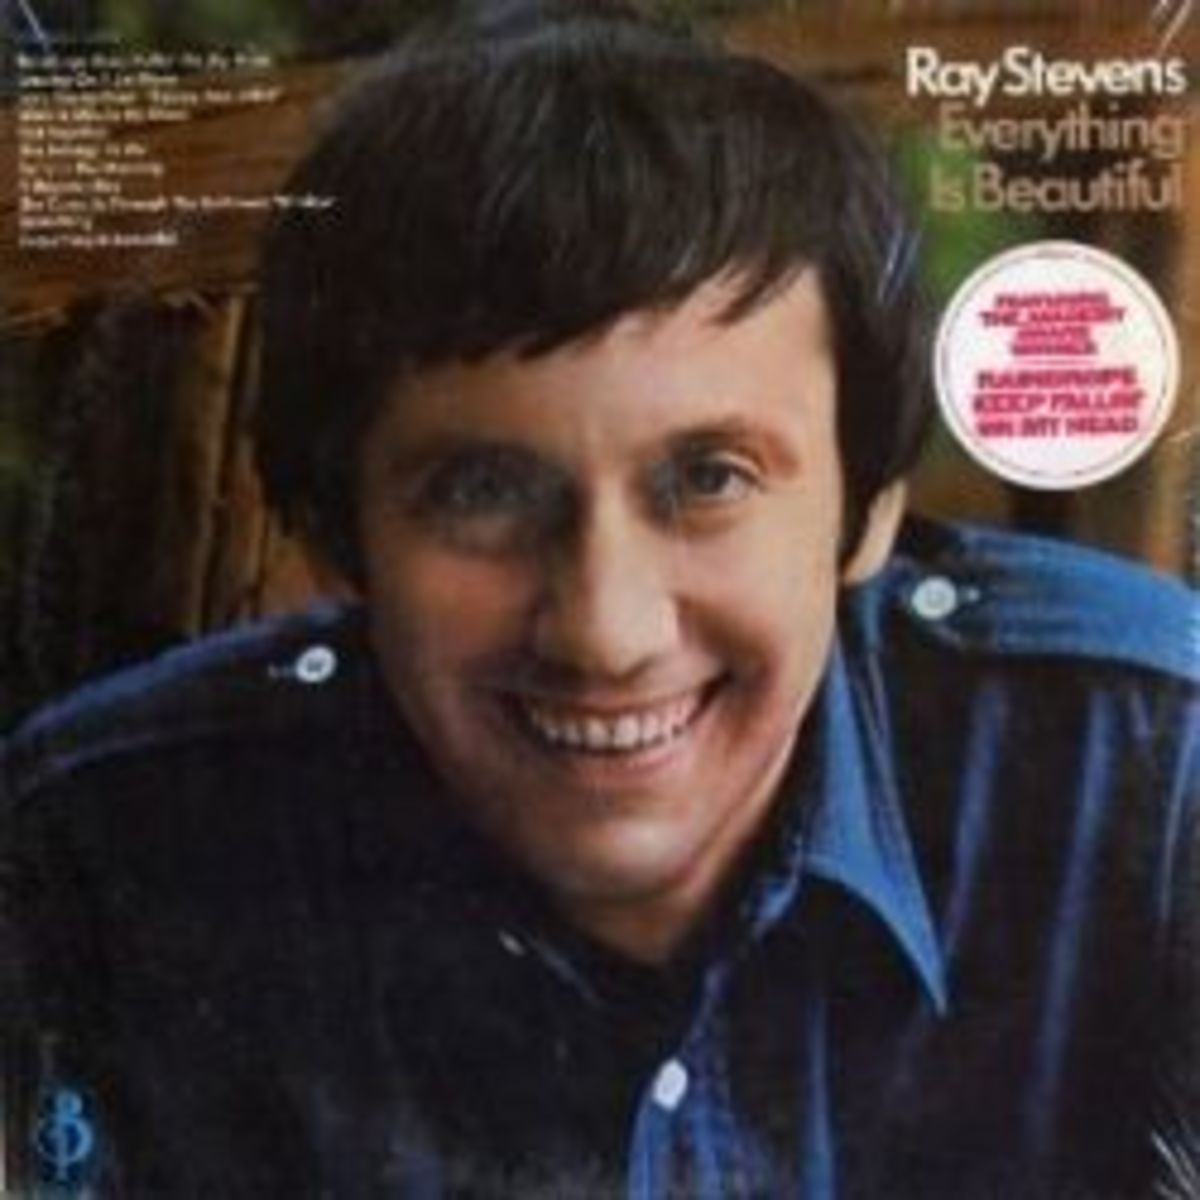 Everything Is Beautiful: Ray Stevens' Classic Song From the 1970s!